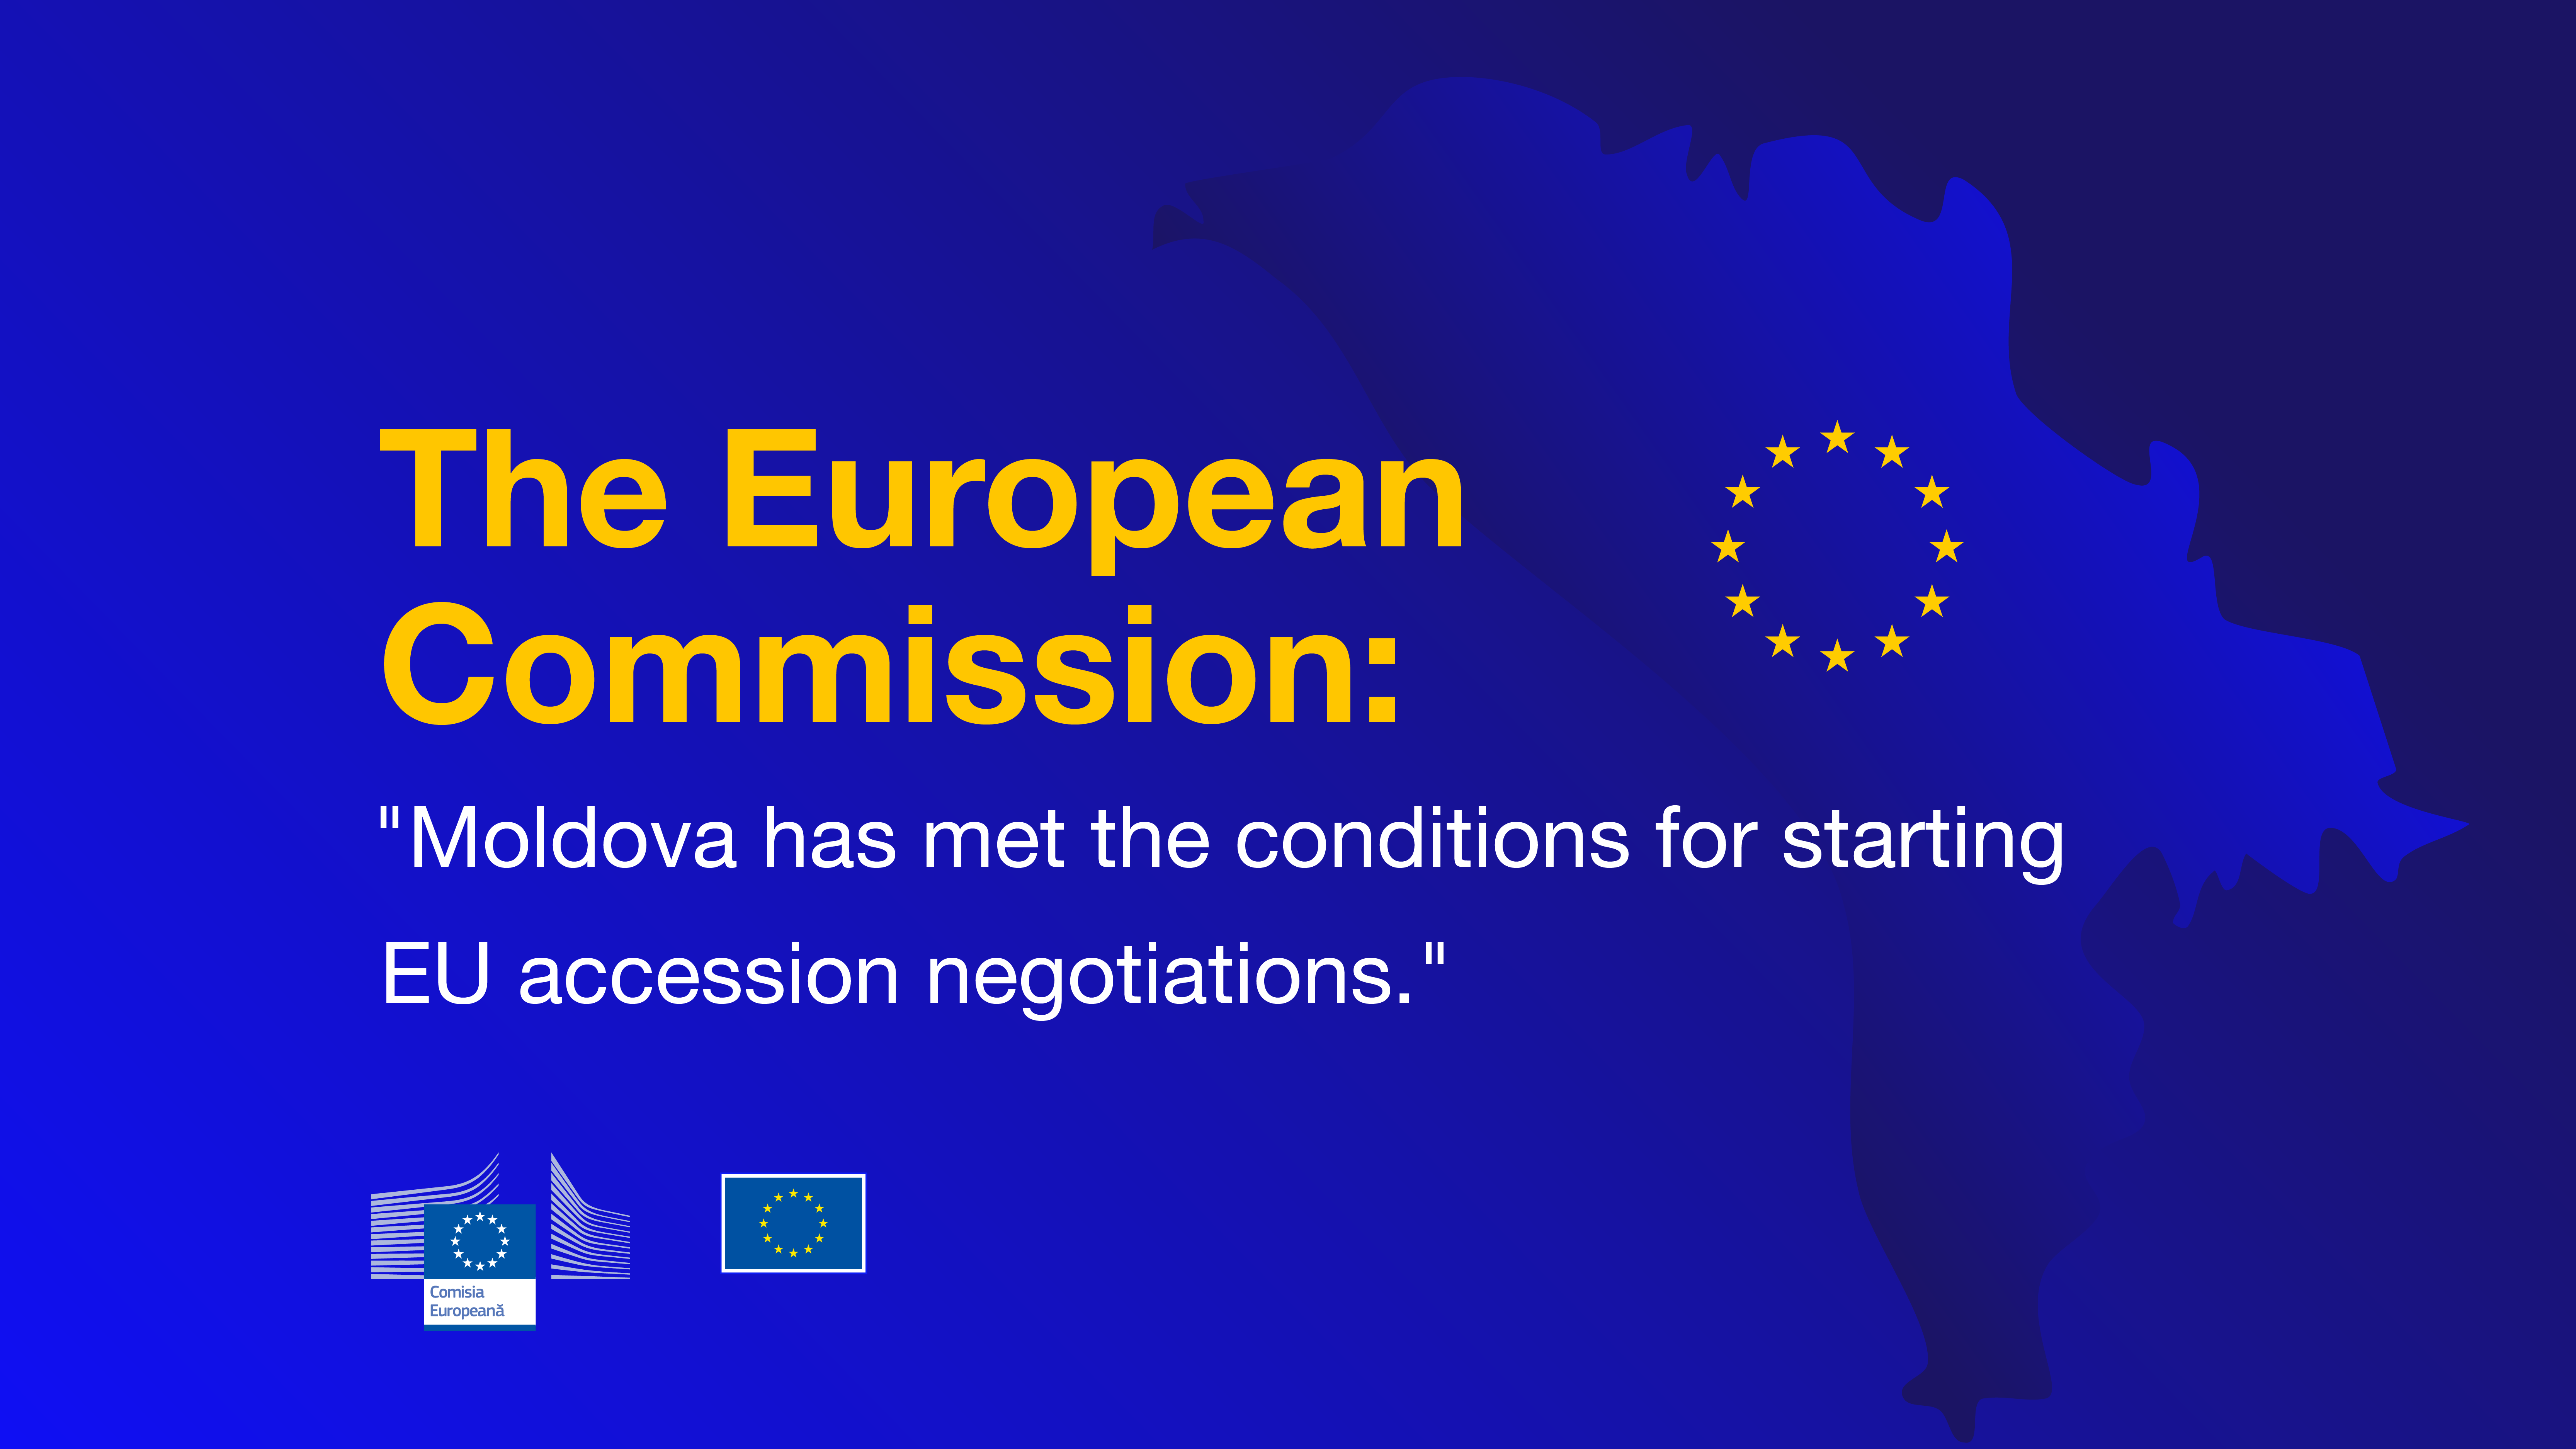 The European Commission has confirmed that Ukraine and the Republic of Moldova have met the preliminary conditions to start accession negotiations to the European Union